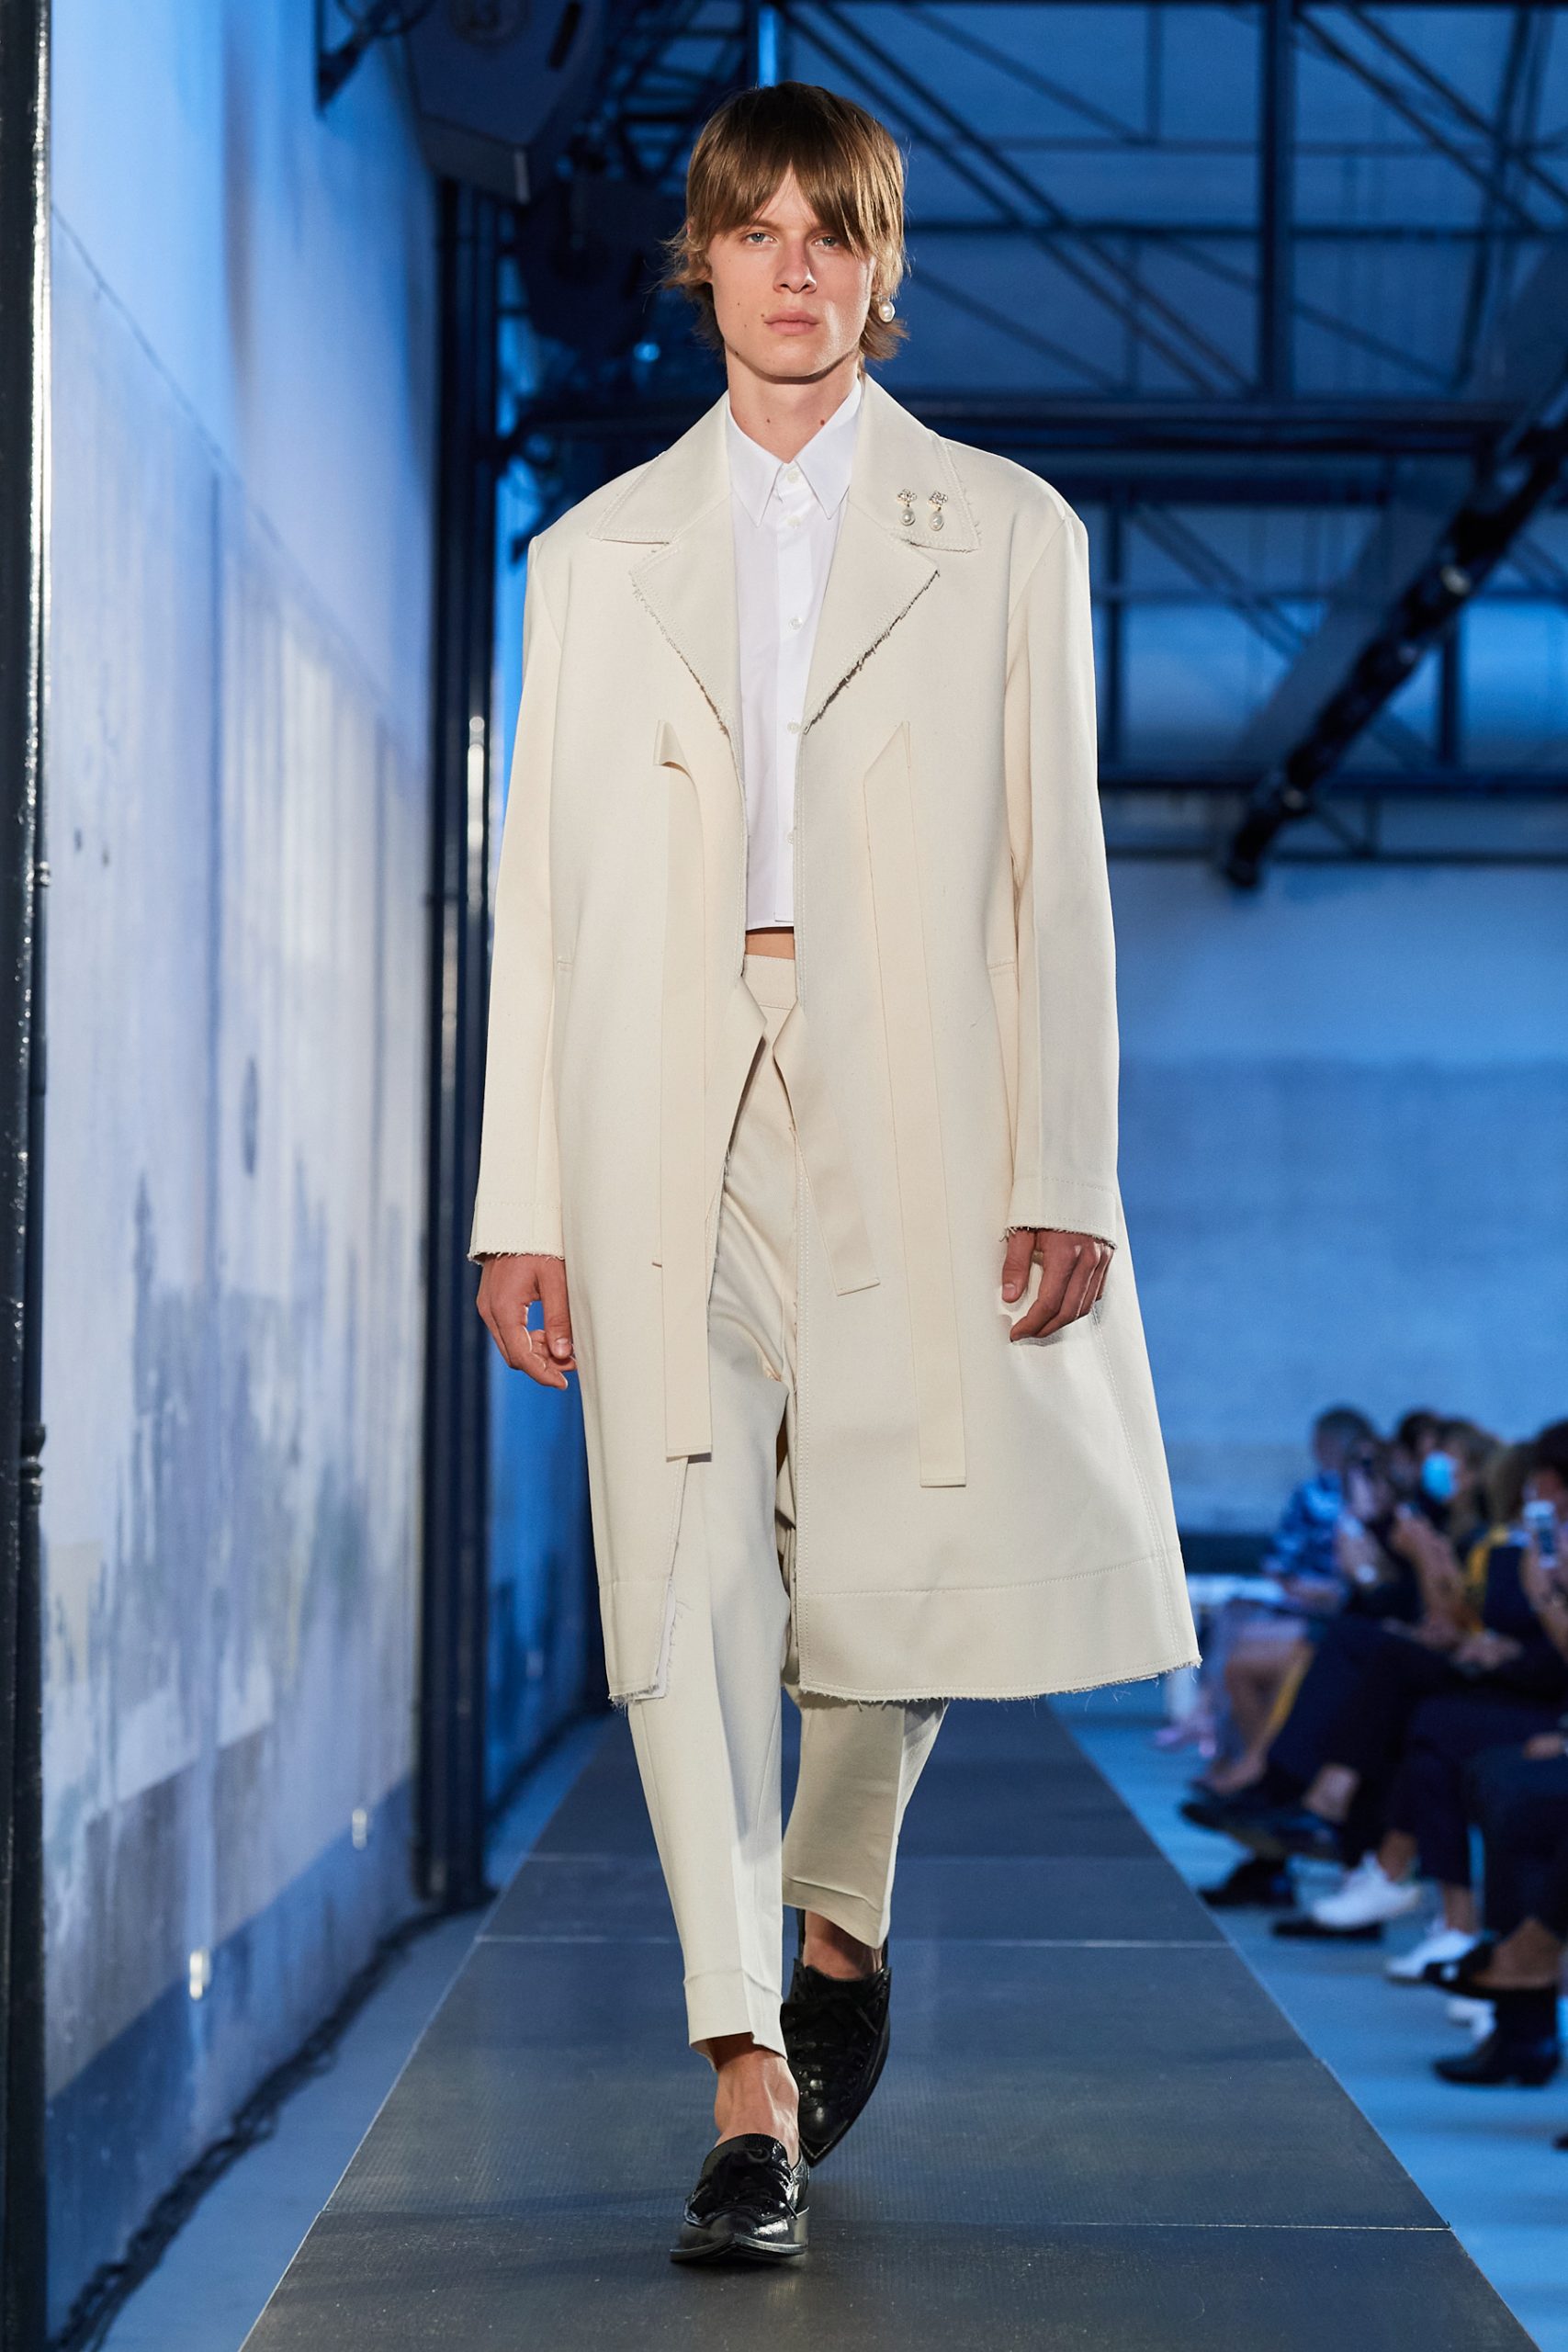 Review of Day 1 of Milan spring 2021 Fashion Shows | The Impression